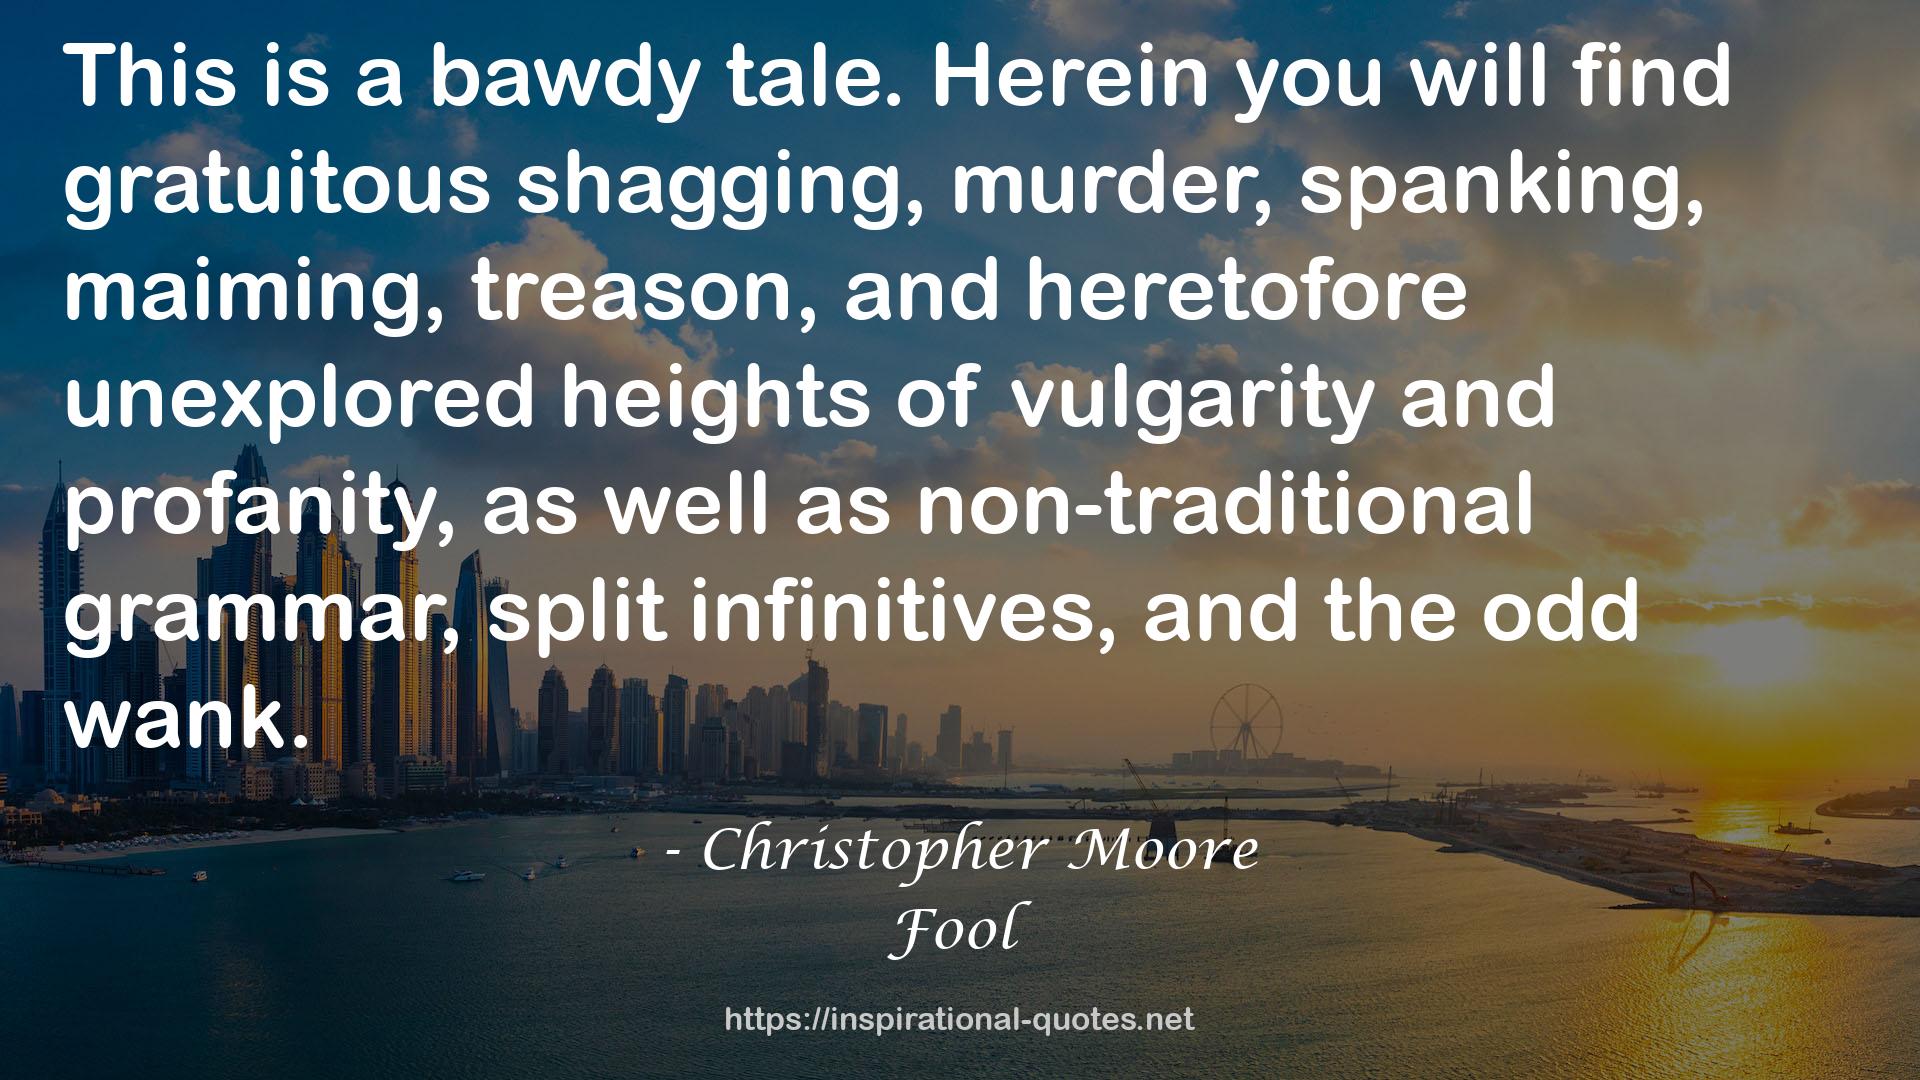 Christopher Moore QUOTES